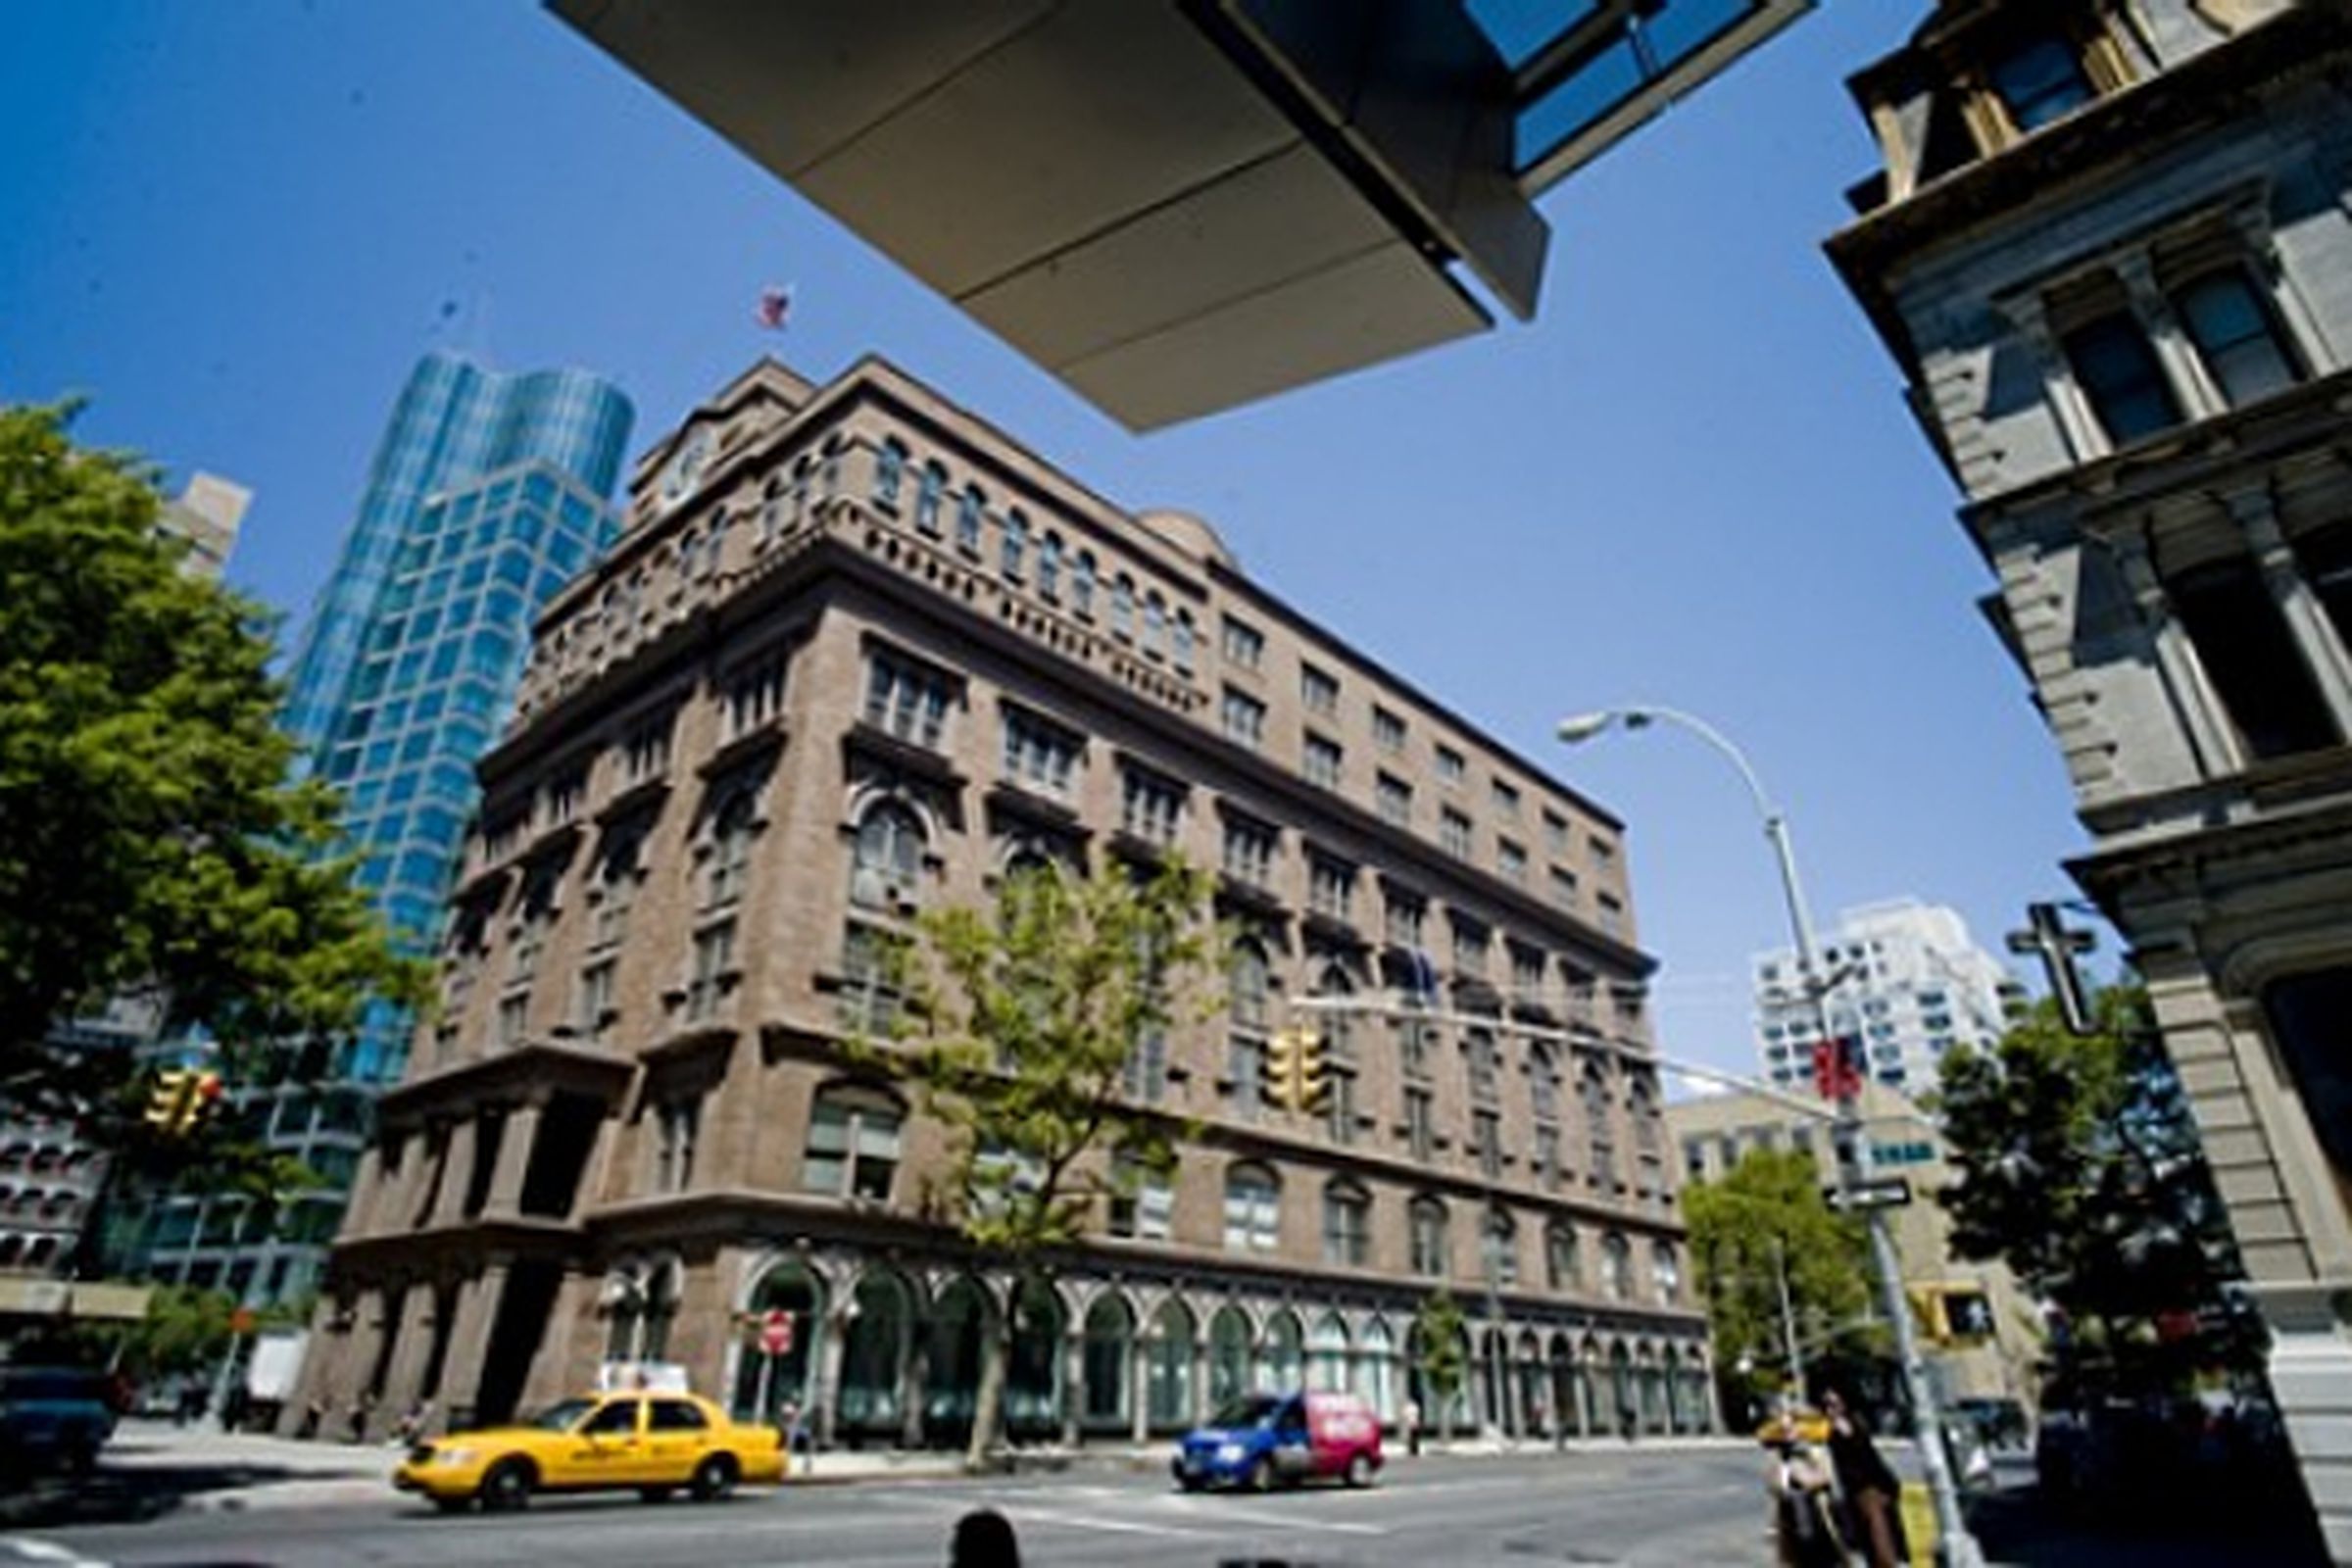 cooper union (official)